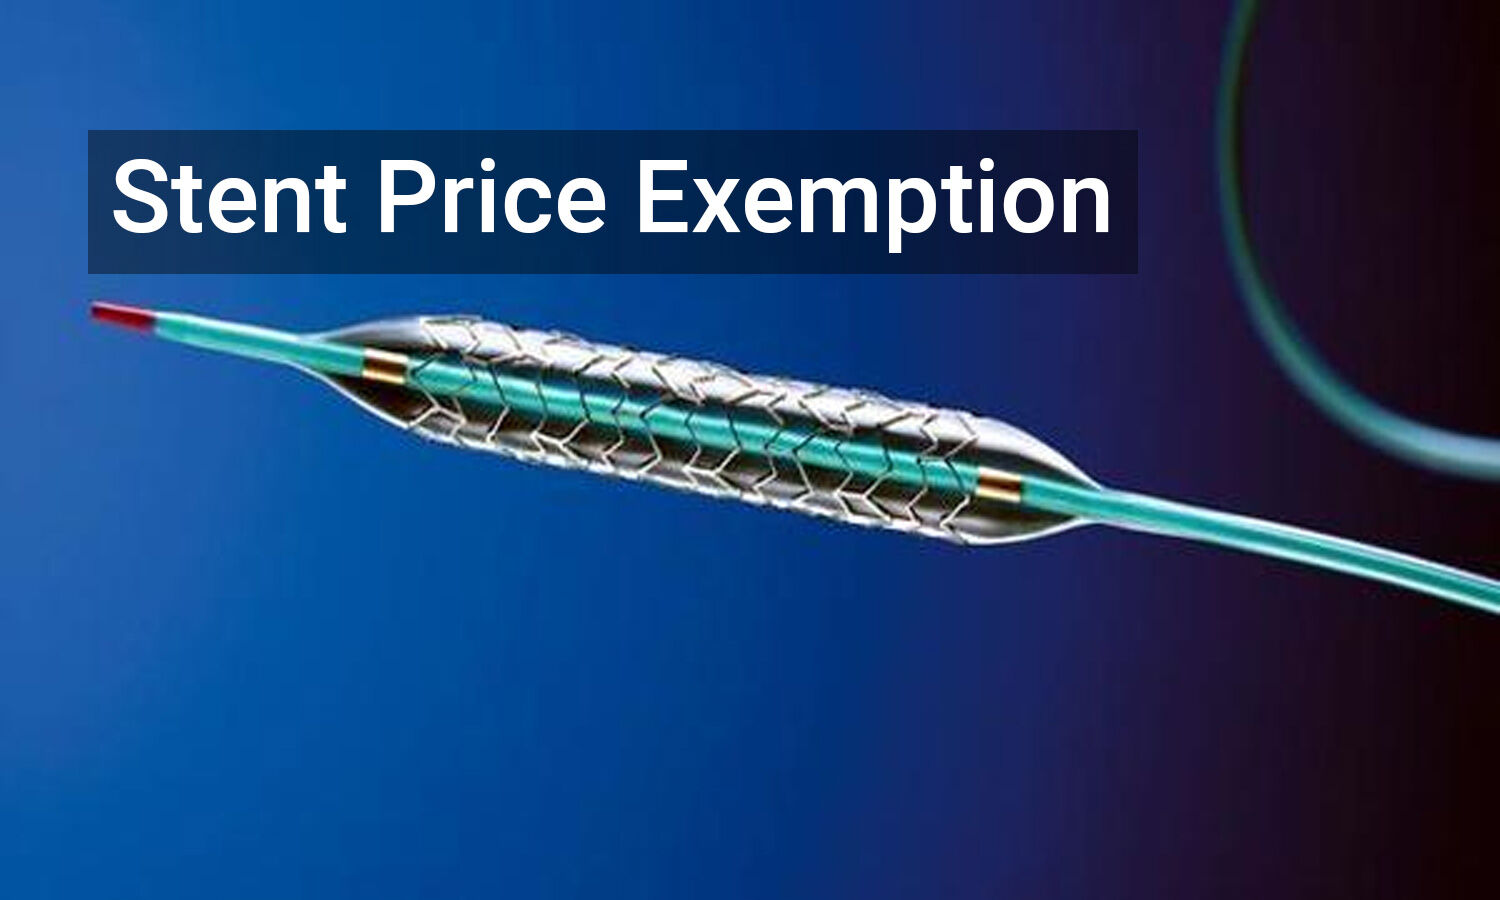 Meril Life Sciences gets 5 years exemption from NPPA for its MeRes100 stent